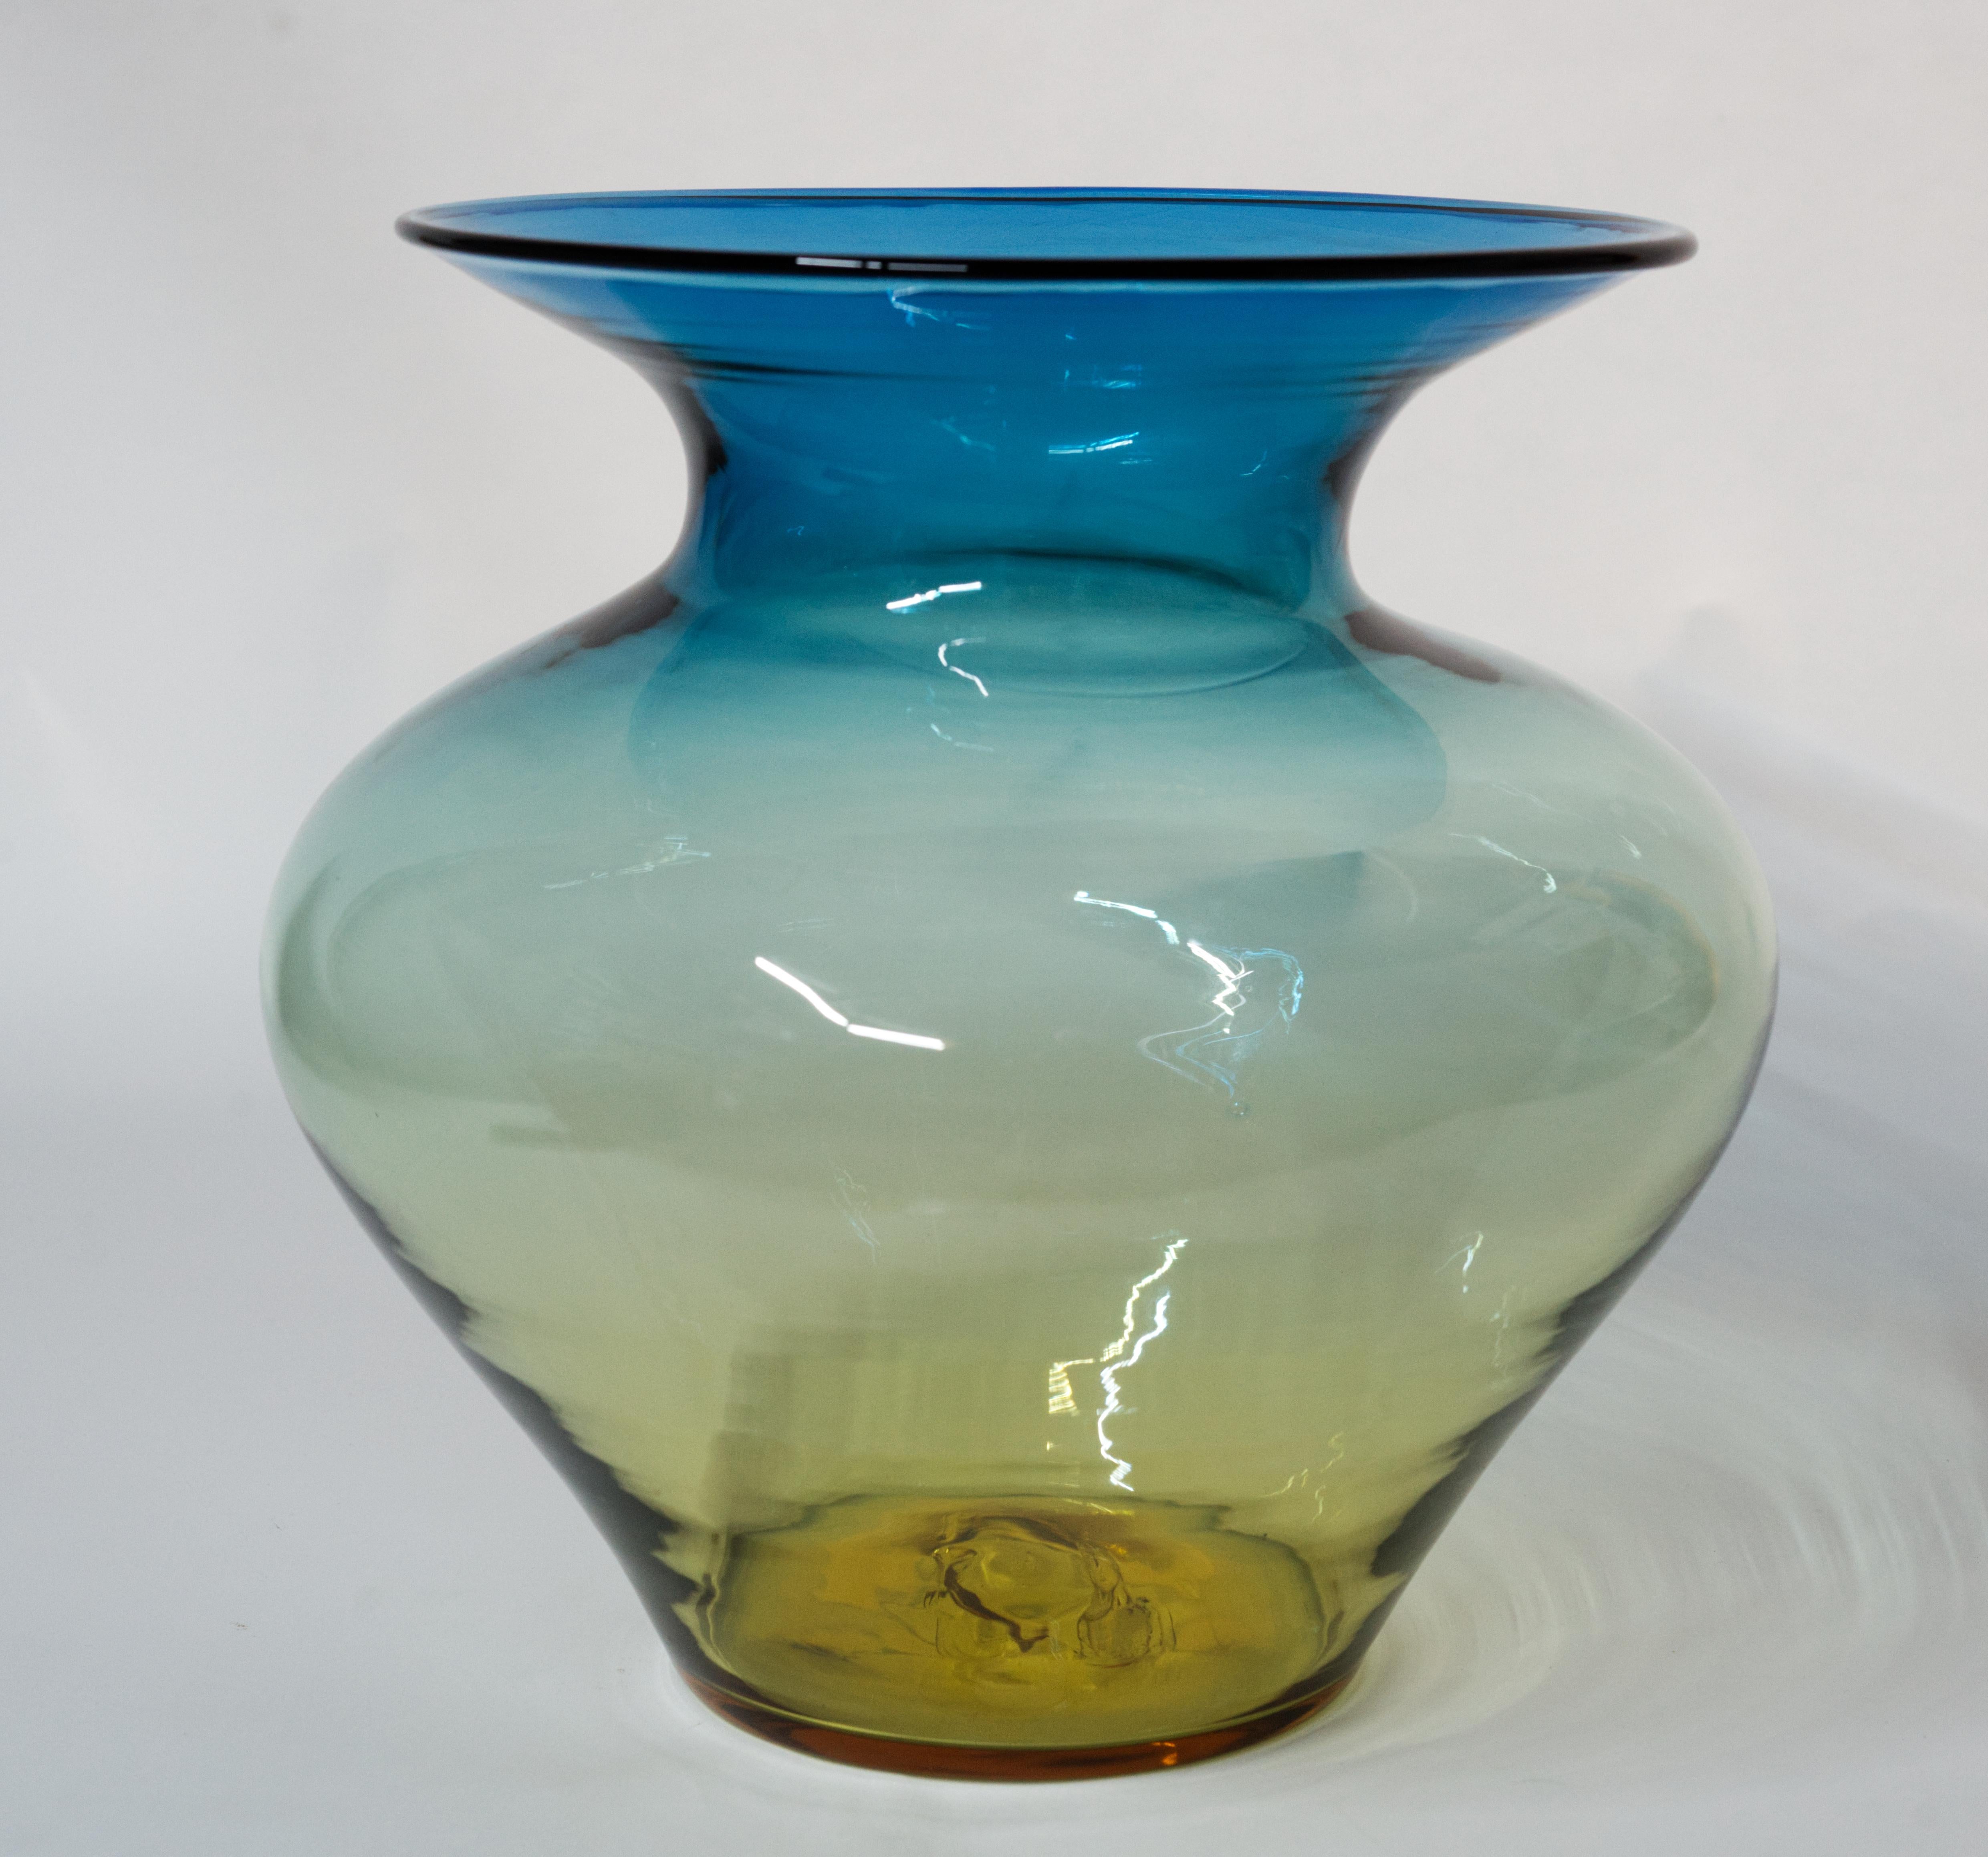  Large Blenko Glass Vase is hand blown in Desert Green color, with ombré color changes from a deep green to amber/yellow.

Desert green color is made by taking a gather of blue Cobalt glass and encasing it in yellow Topaz, but leaving a very thick